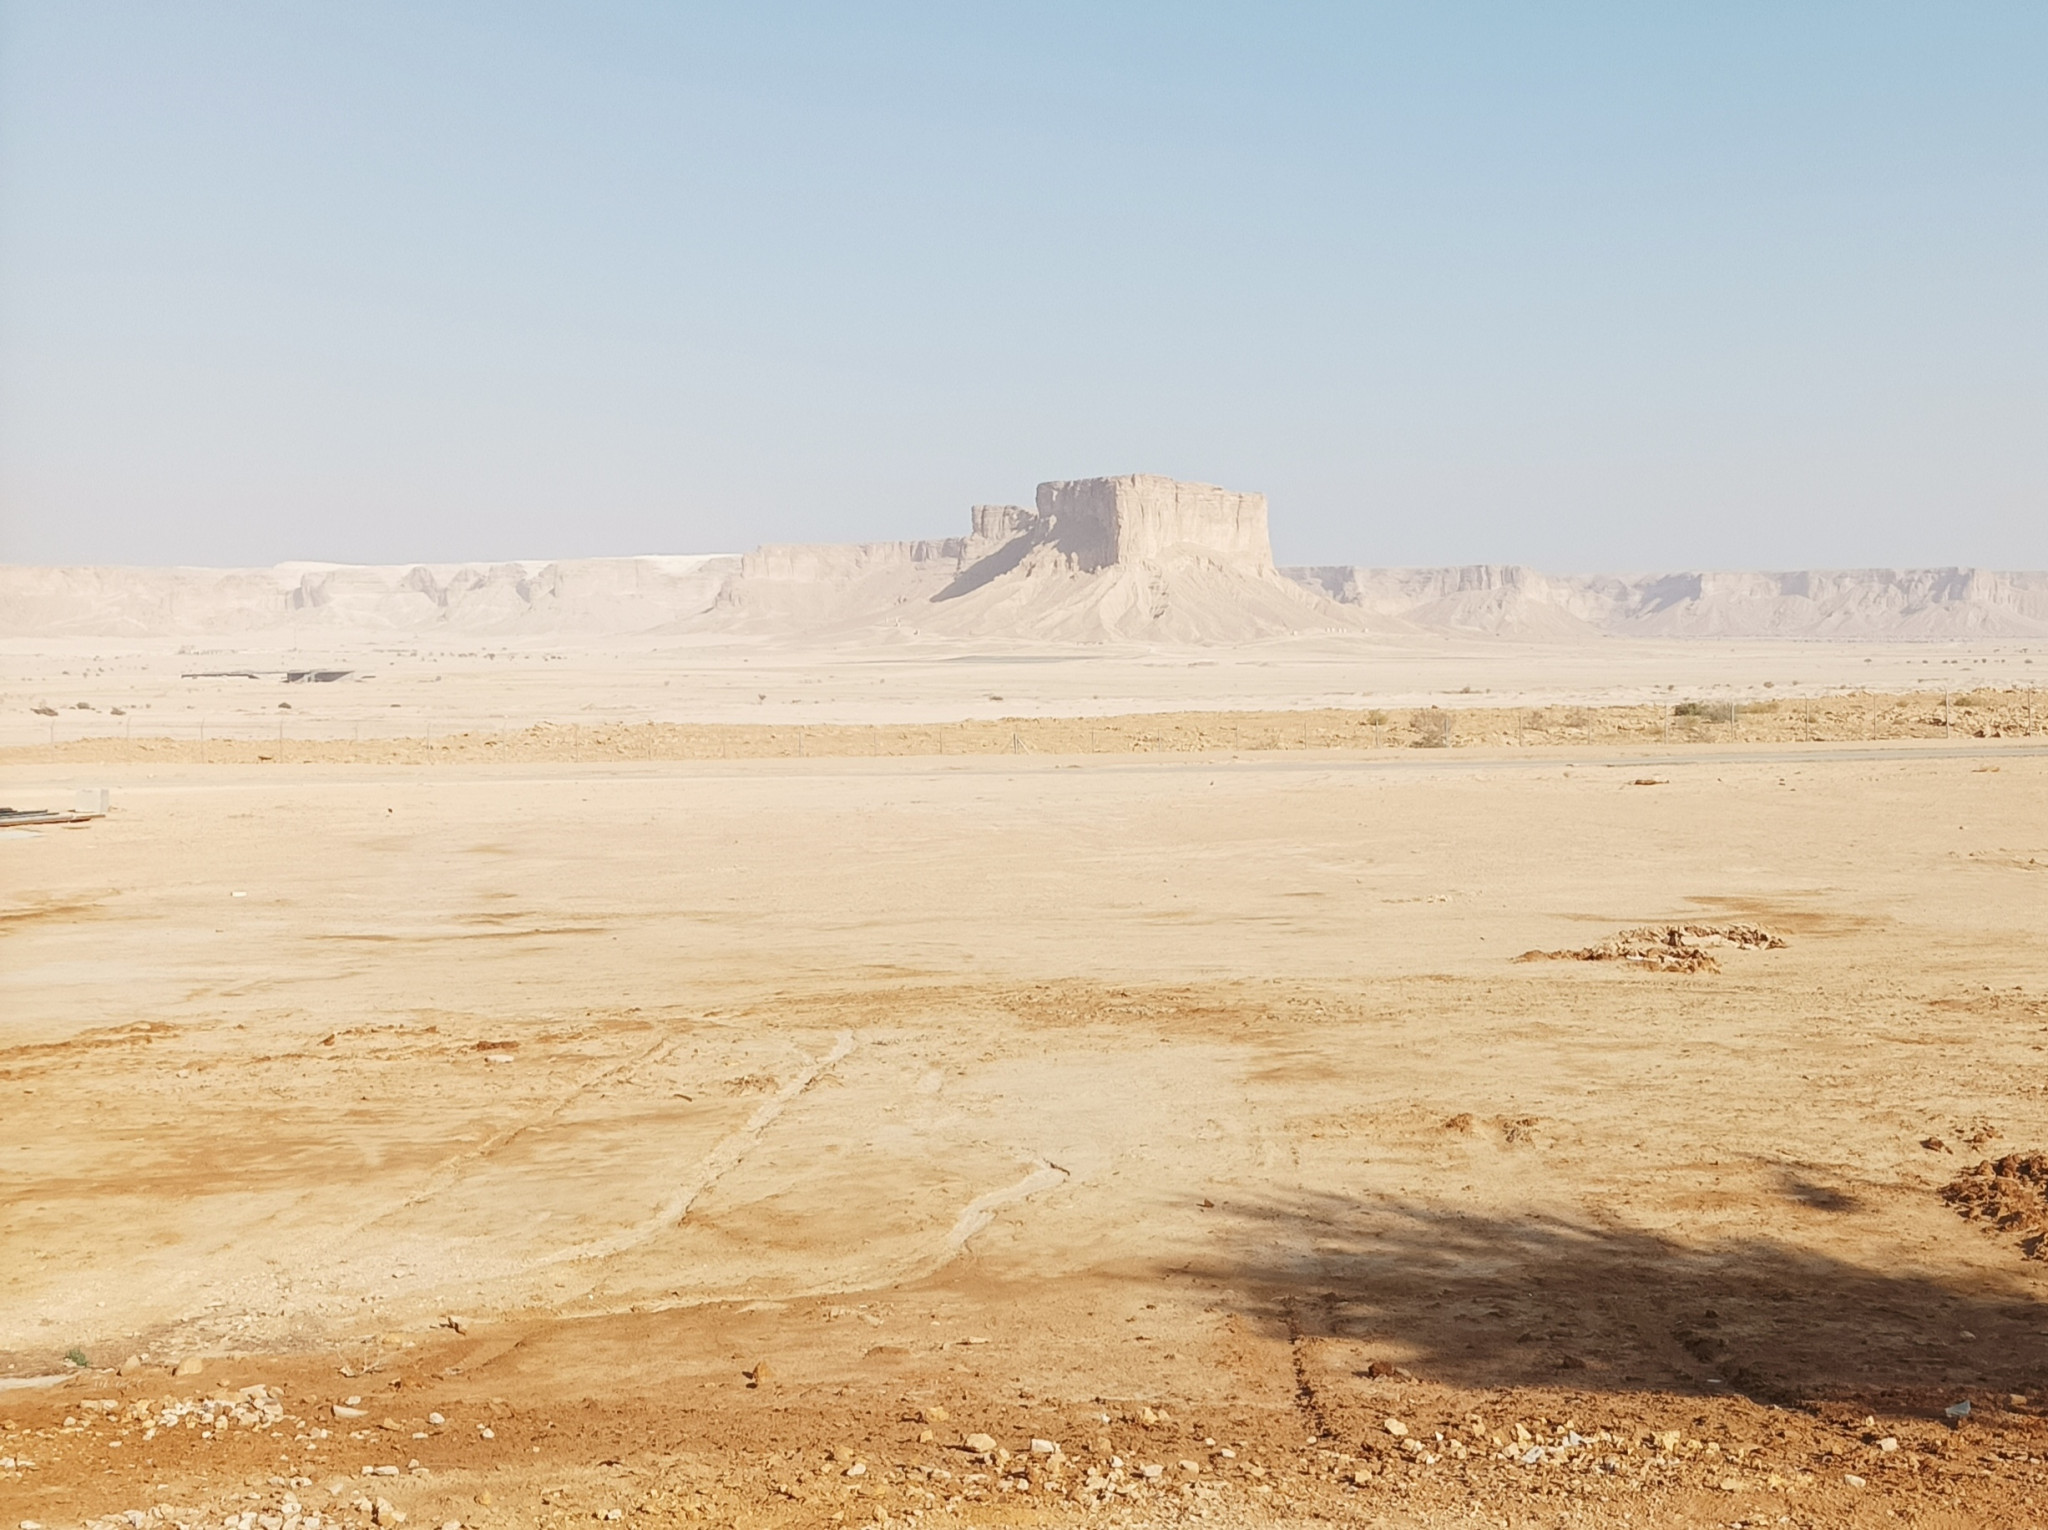 The construction of a stadium at Qiddiya, an area known as 